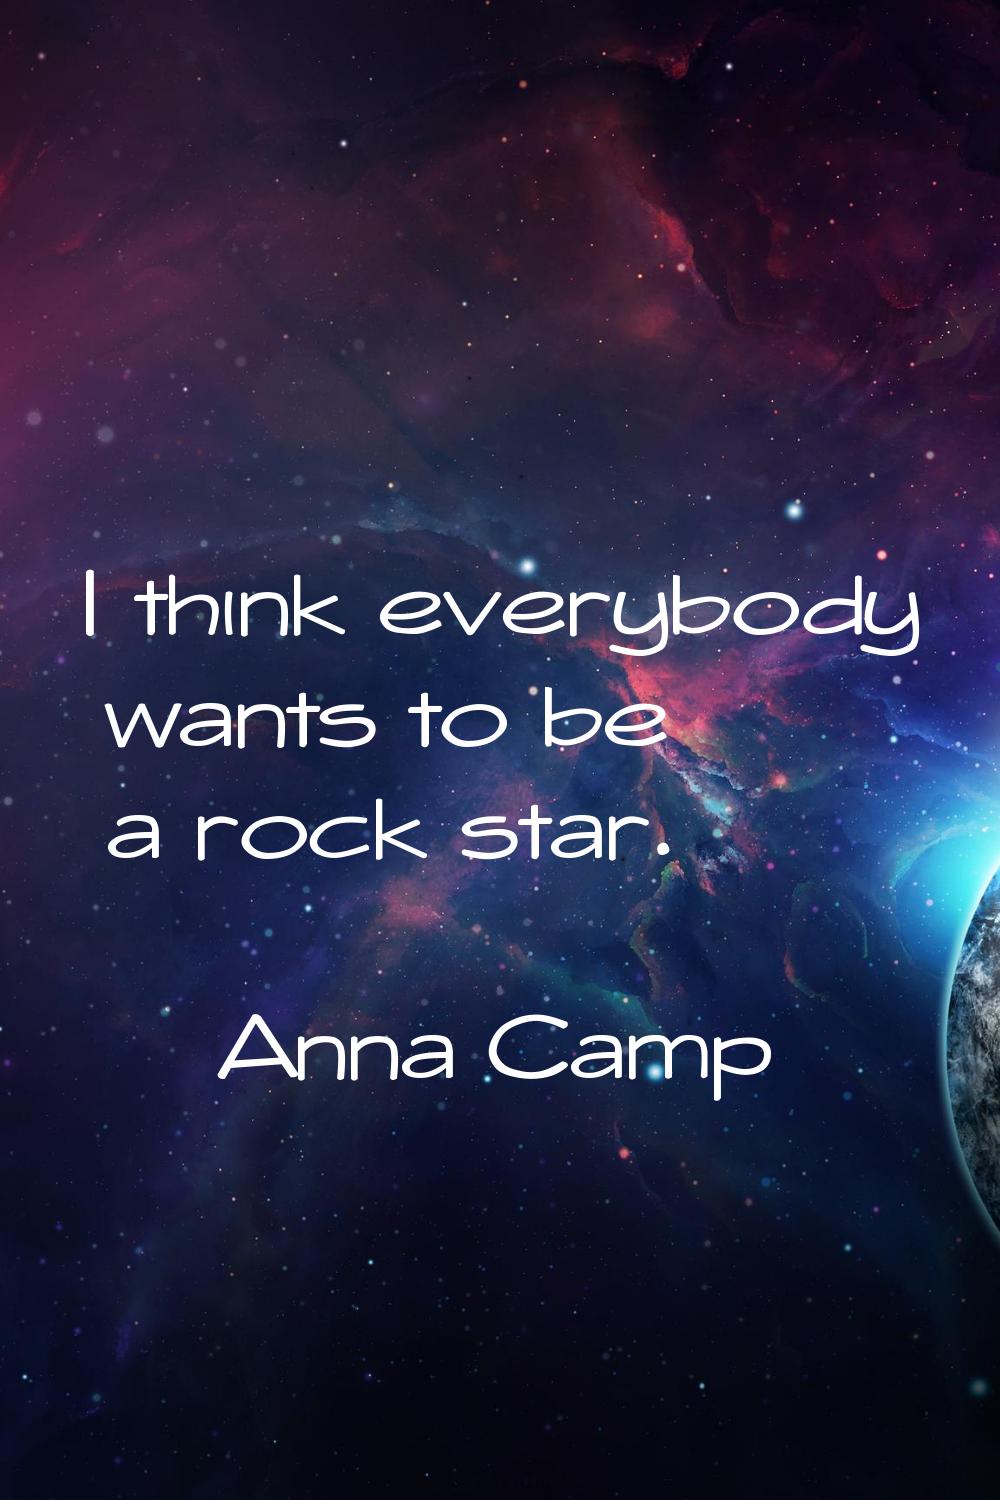 I think everybody wants to be a rock star.